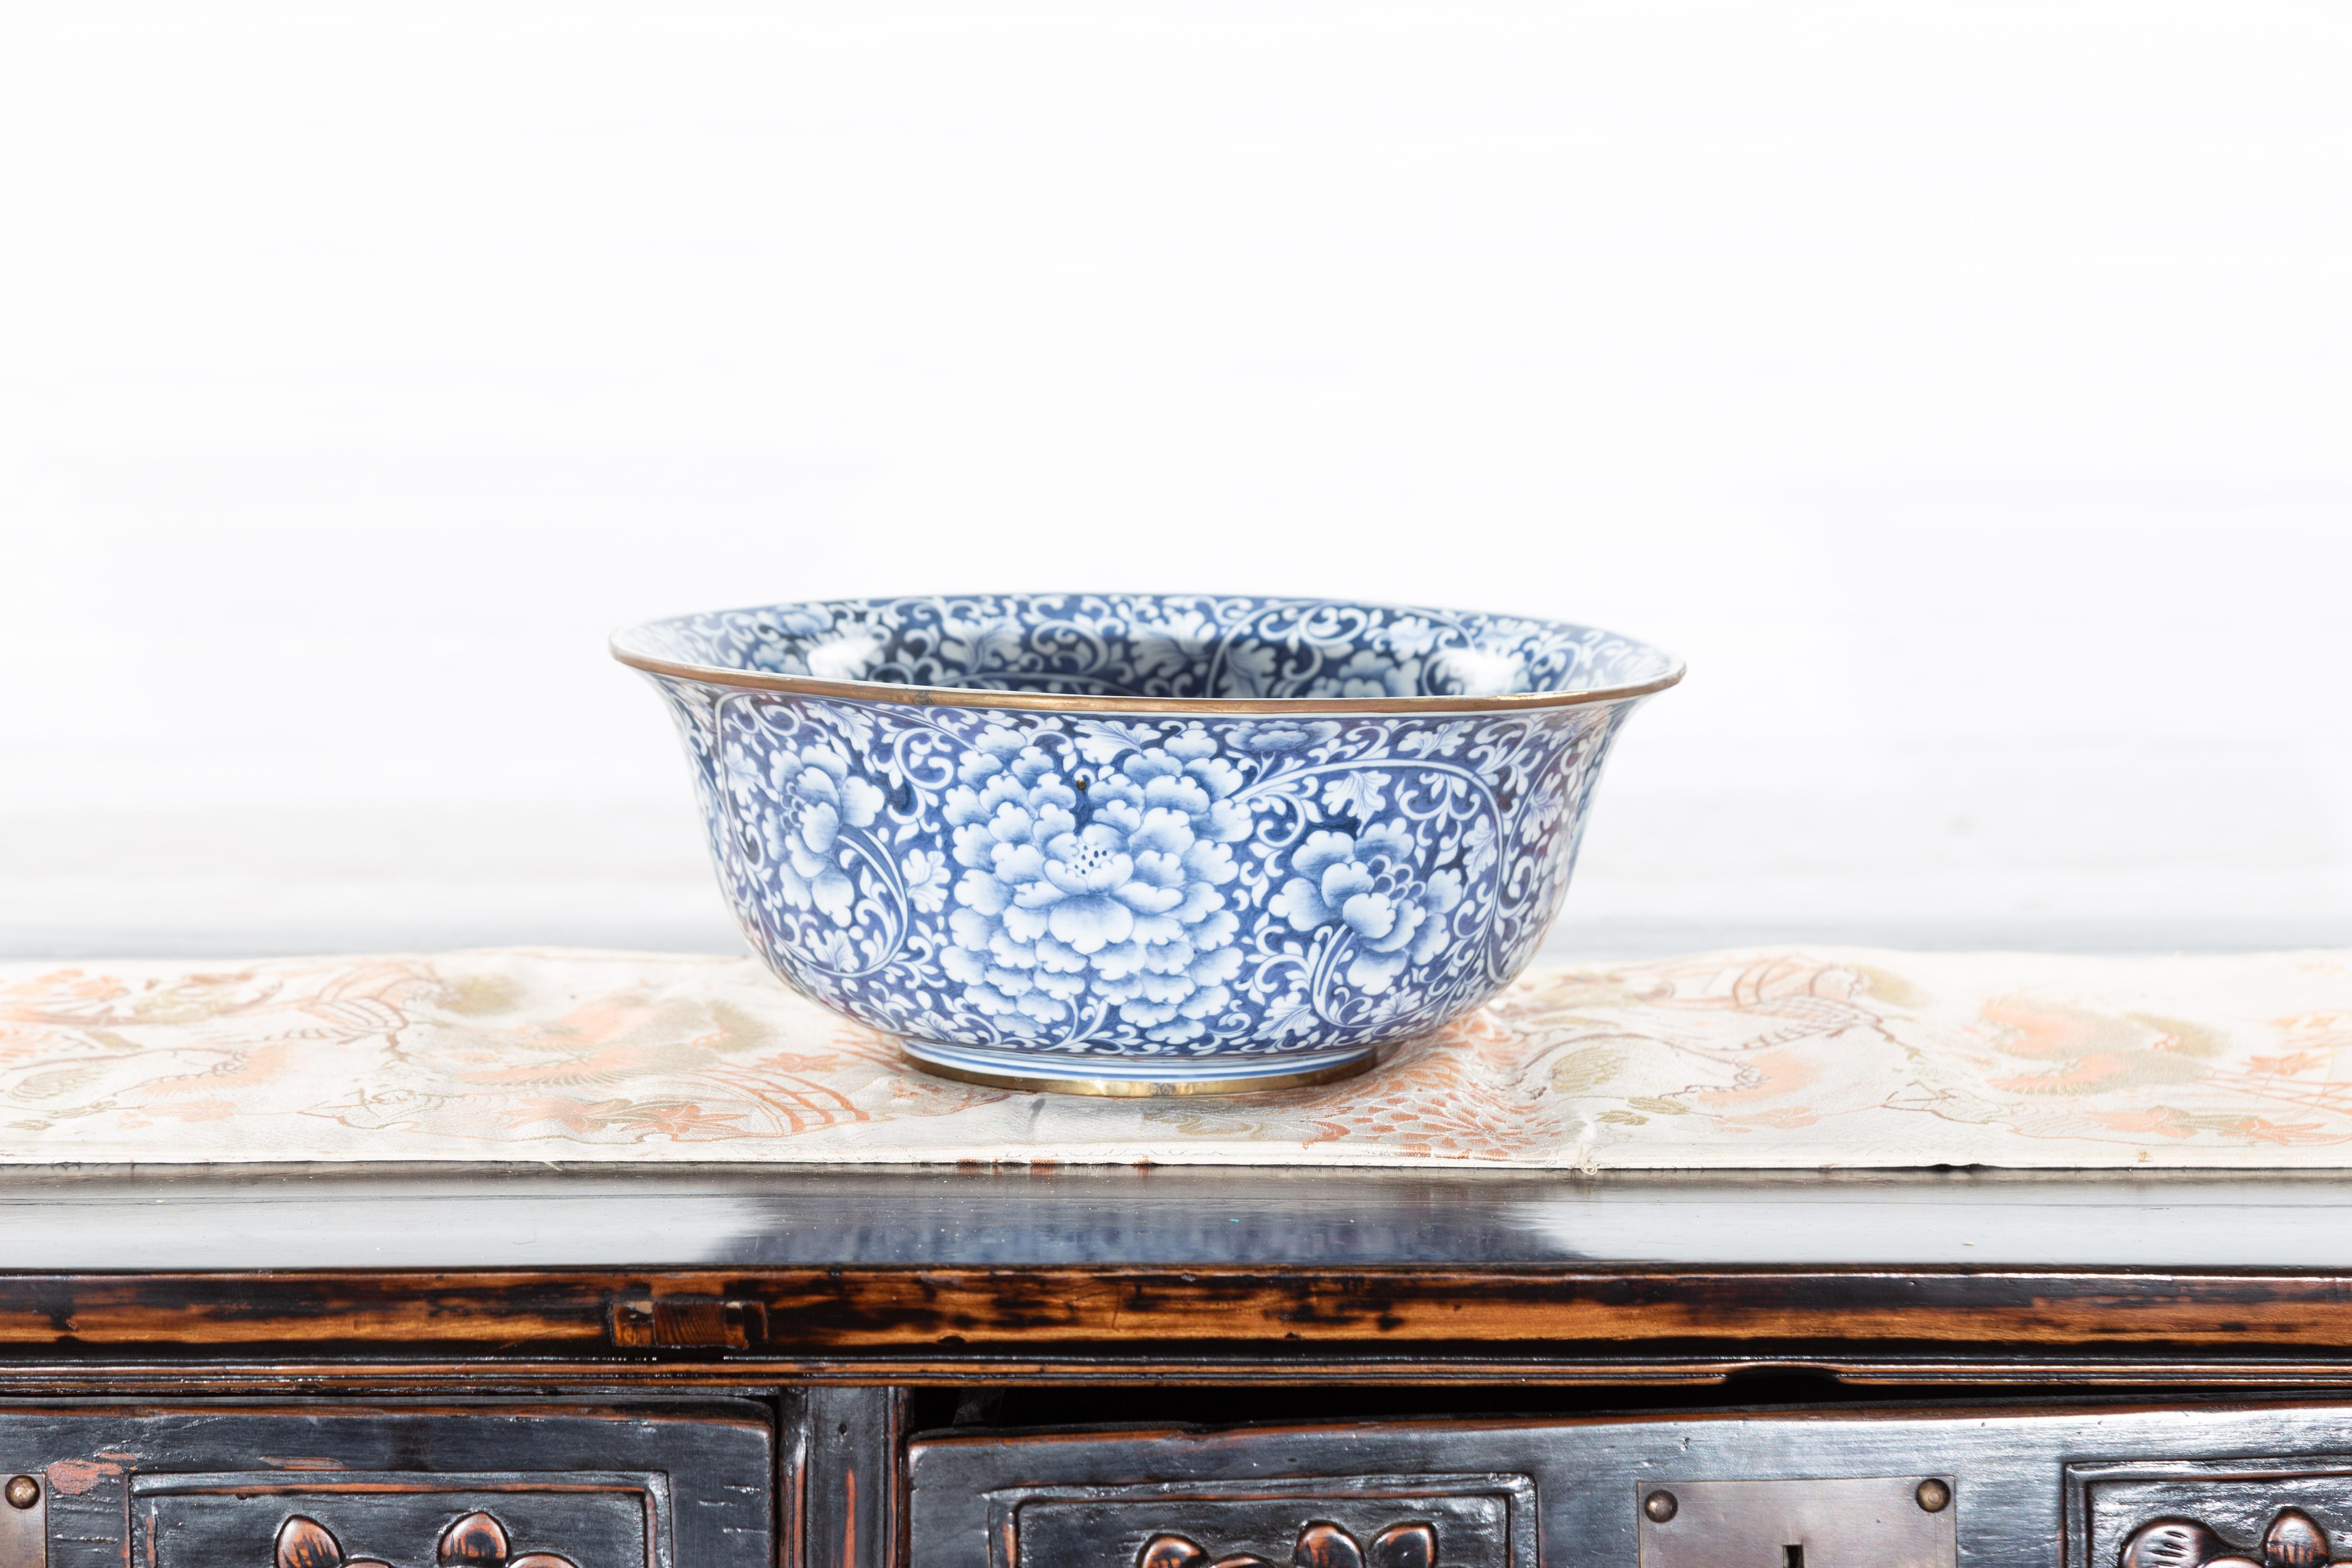 Contemporary Thai Hand-Painted Blue and White Porcelain Bowl with Floral Motifs 8